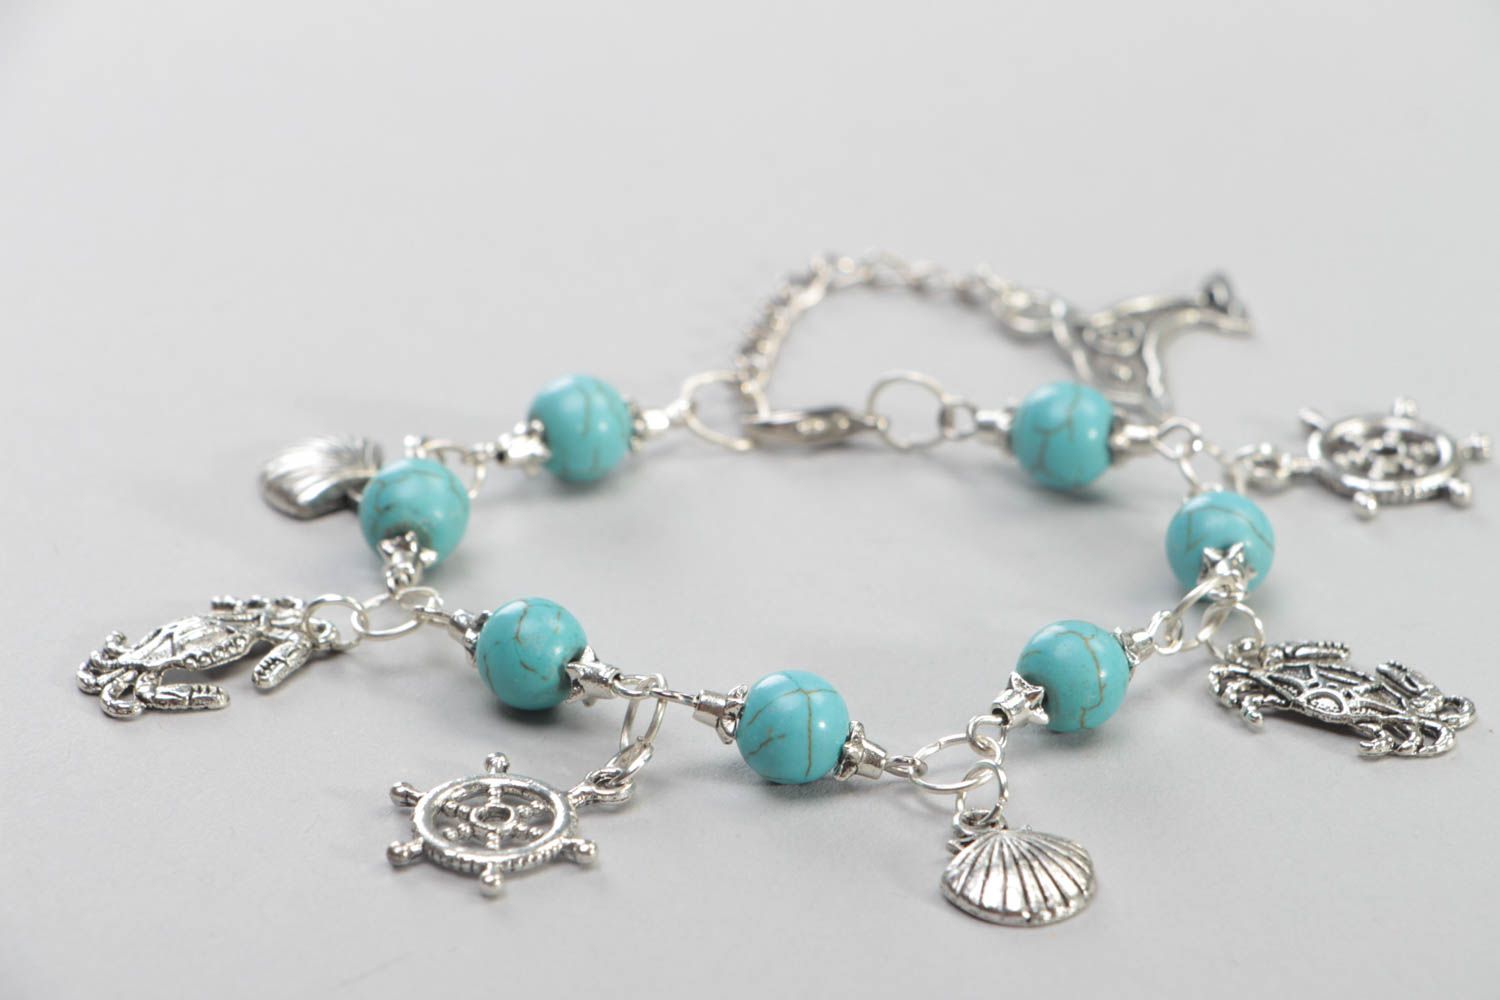 Handmade turquoise bracelet unusual accessory with metal charms cute jewelry photo 3